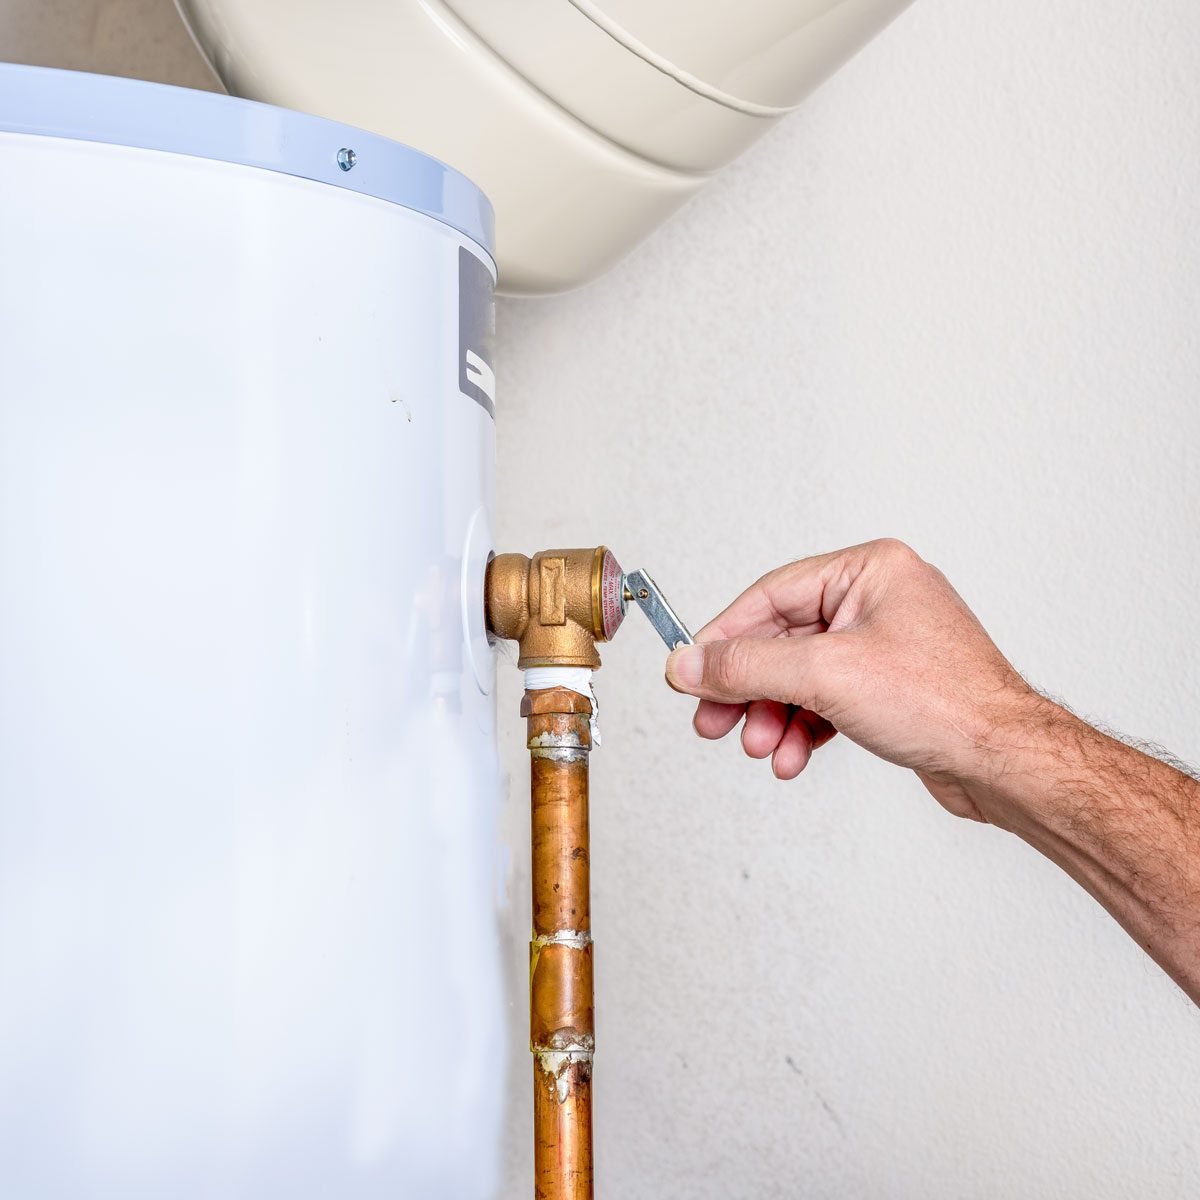 Is Your Water Heater's TPR Valve Leaking? Here's What to Do